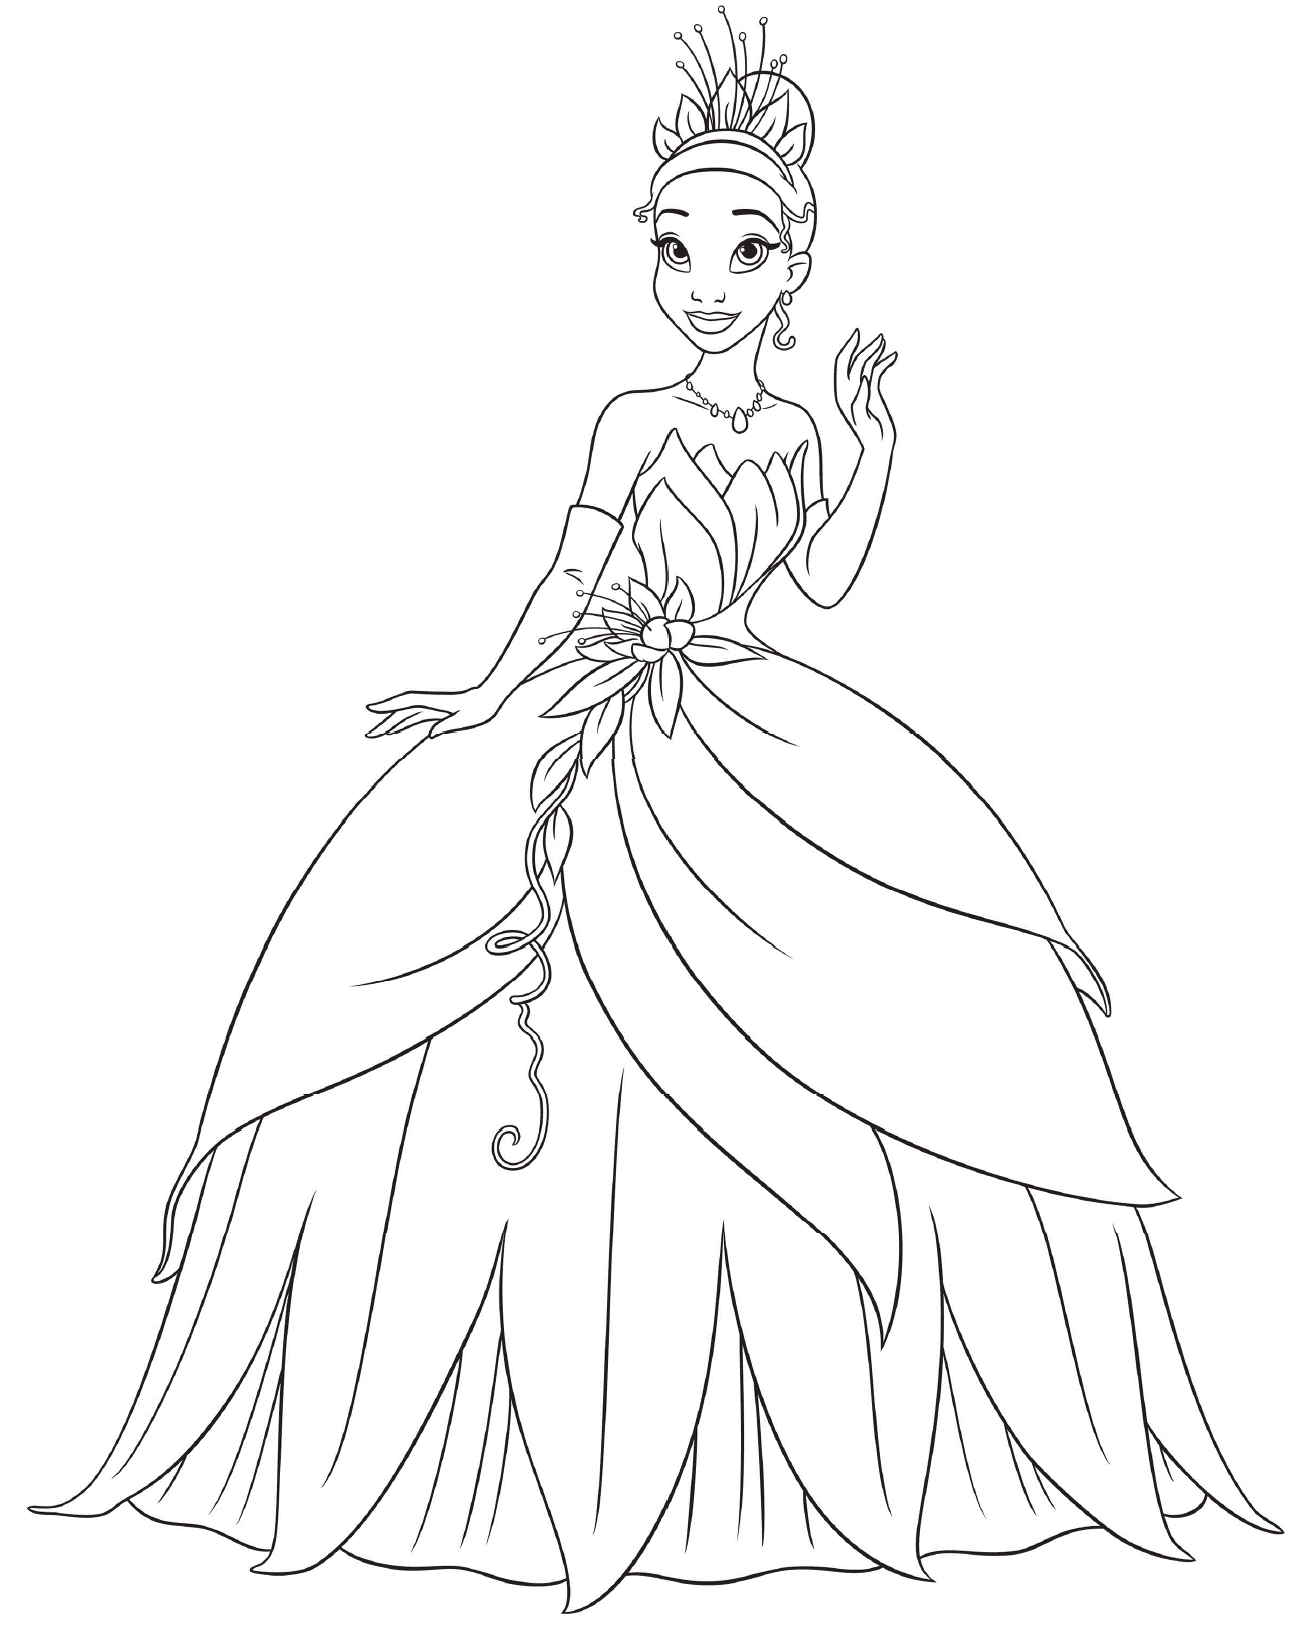 Princess tiana coloring pages download and print for free